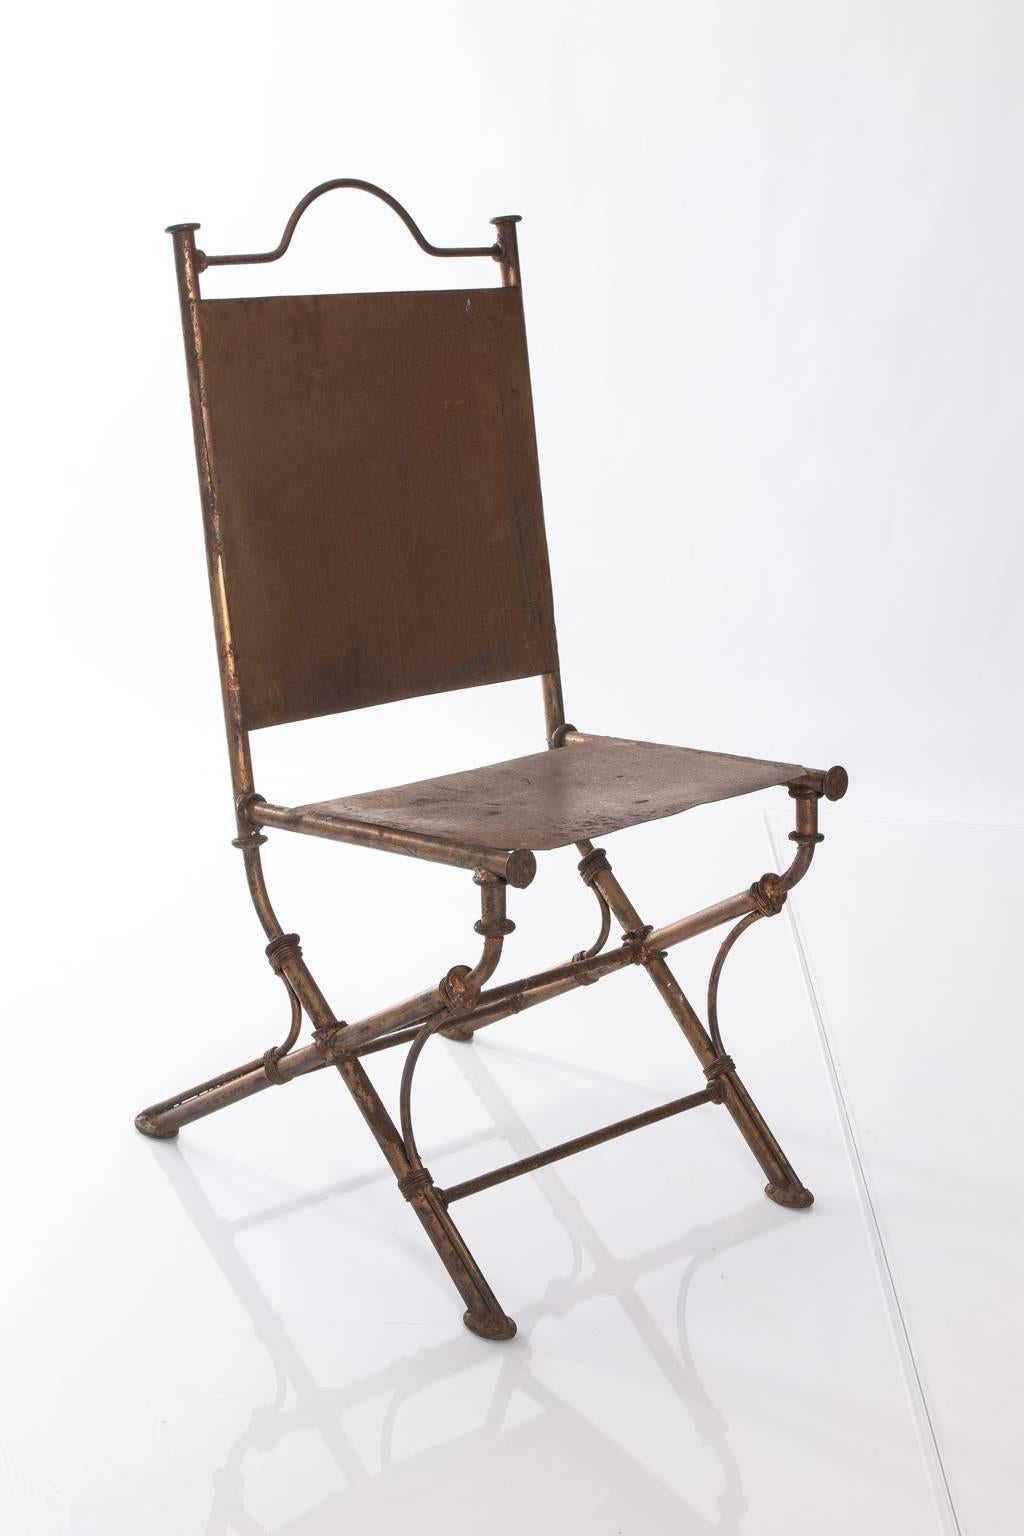 20th Century Faux Bamboo Garden Chairs